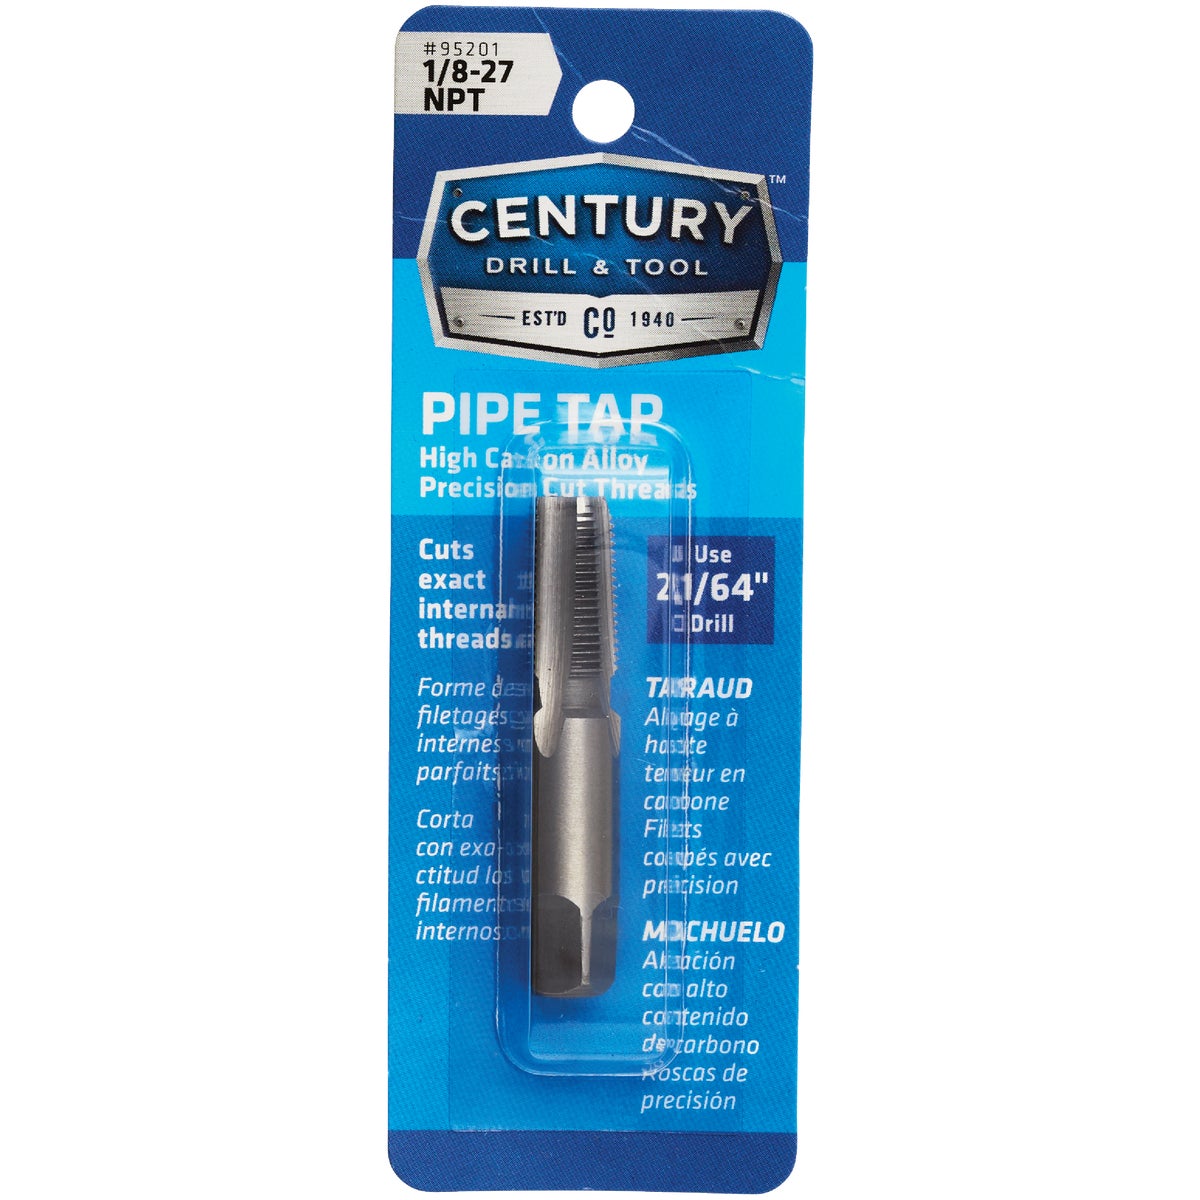 Century Drill & Tool 1/8-27 NPT National Pipe Thread Tap